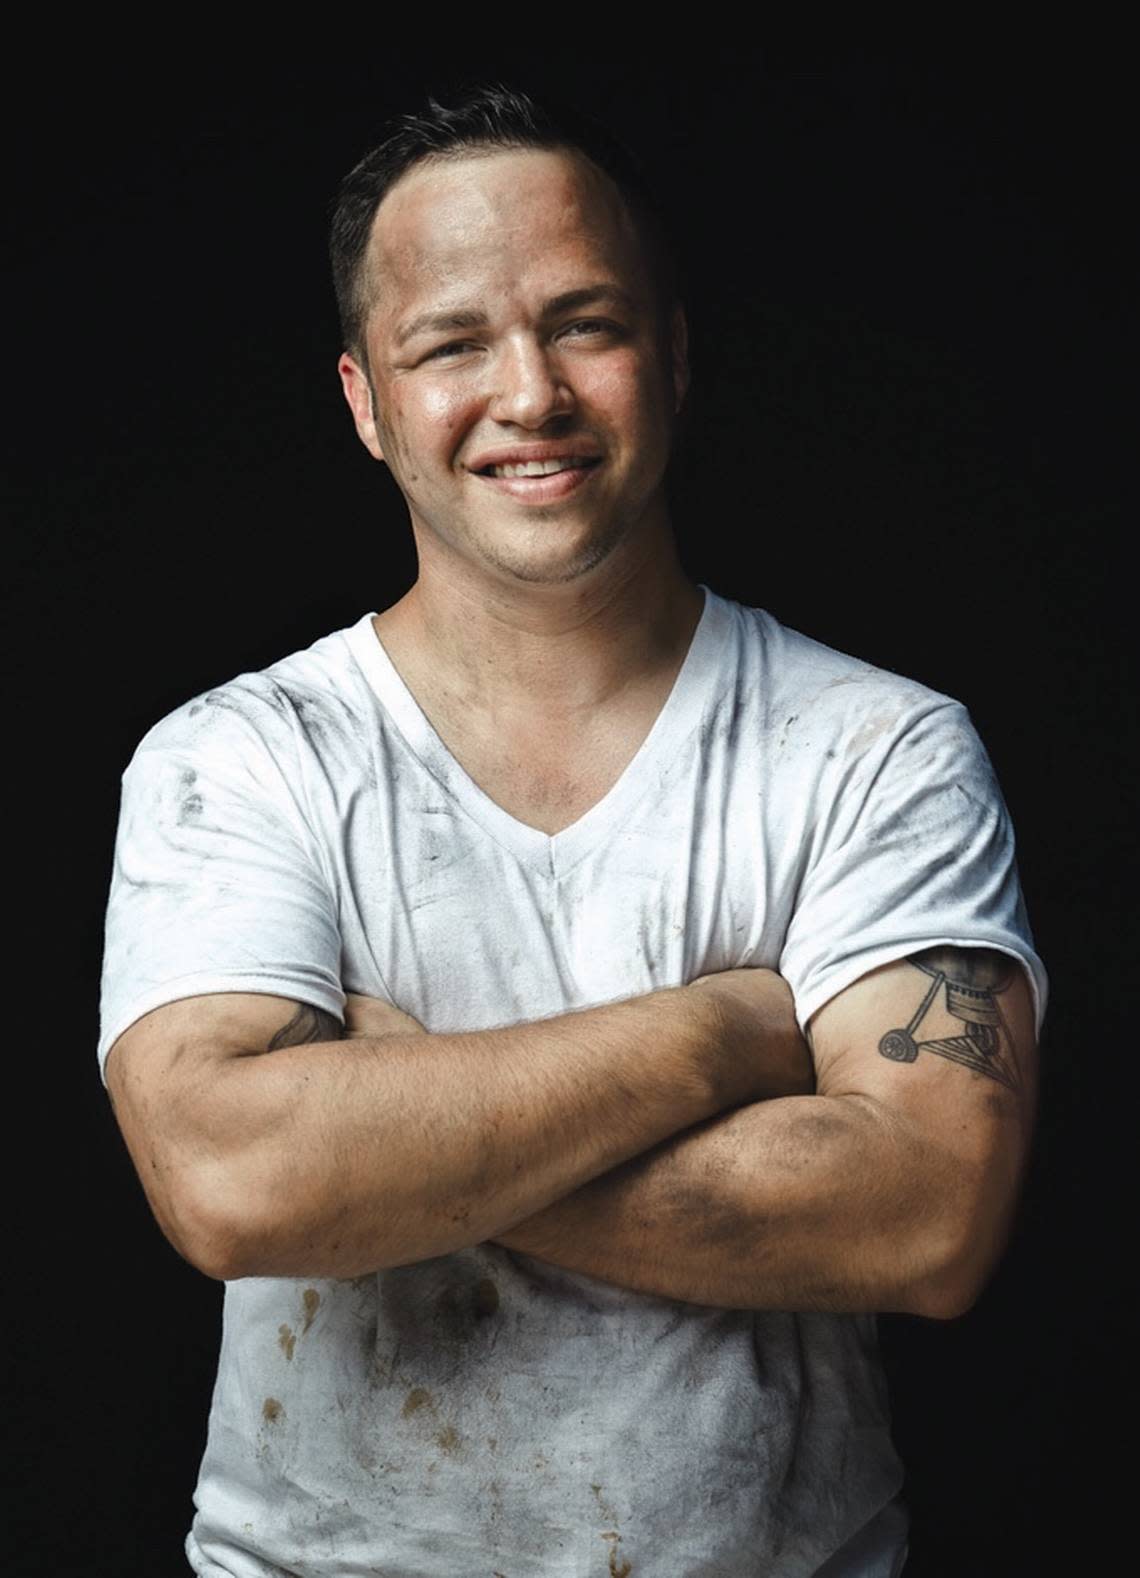 Chris Prieto opened Prime Barbecue restaurant in Knightdale in 2020. He has taught barbecue classes, wrote a cookbook for Southern Living, travels the country as a barbecue judge and competitor, and appeared in the sixth season of reality series “BBQ Pitmasters” on Destination America.